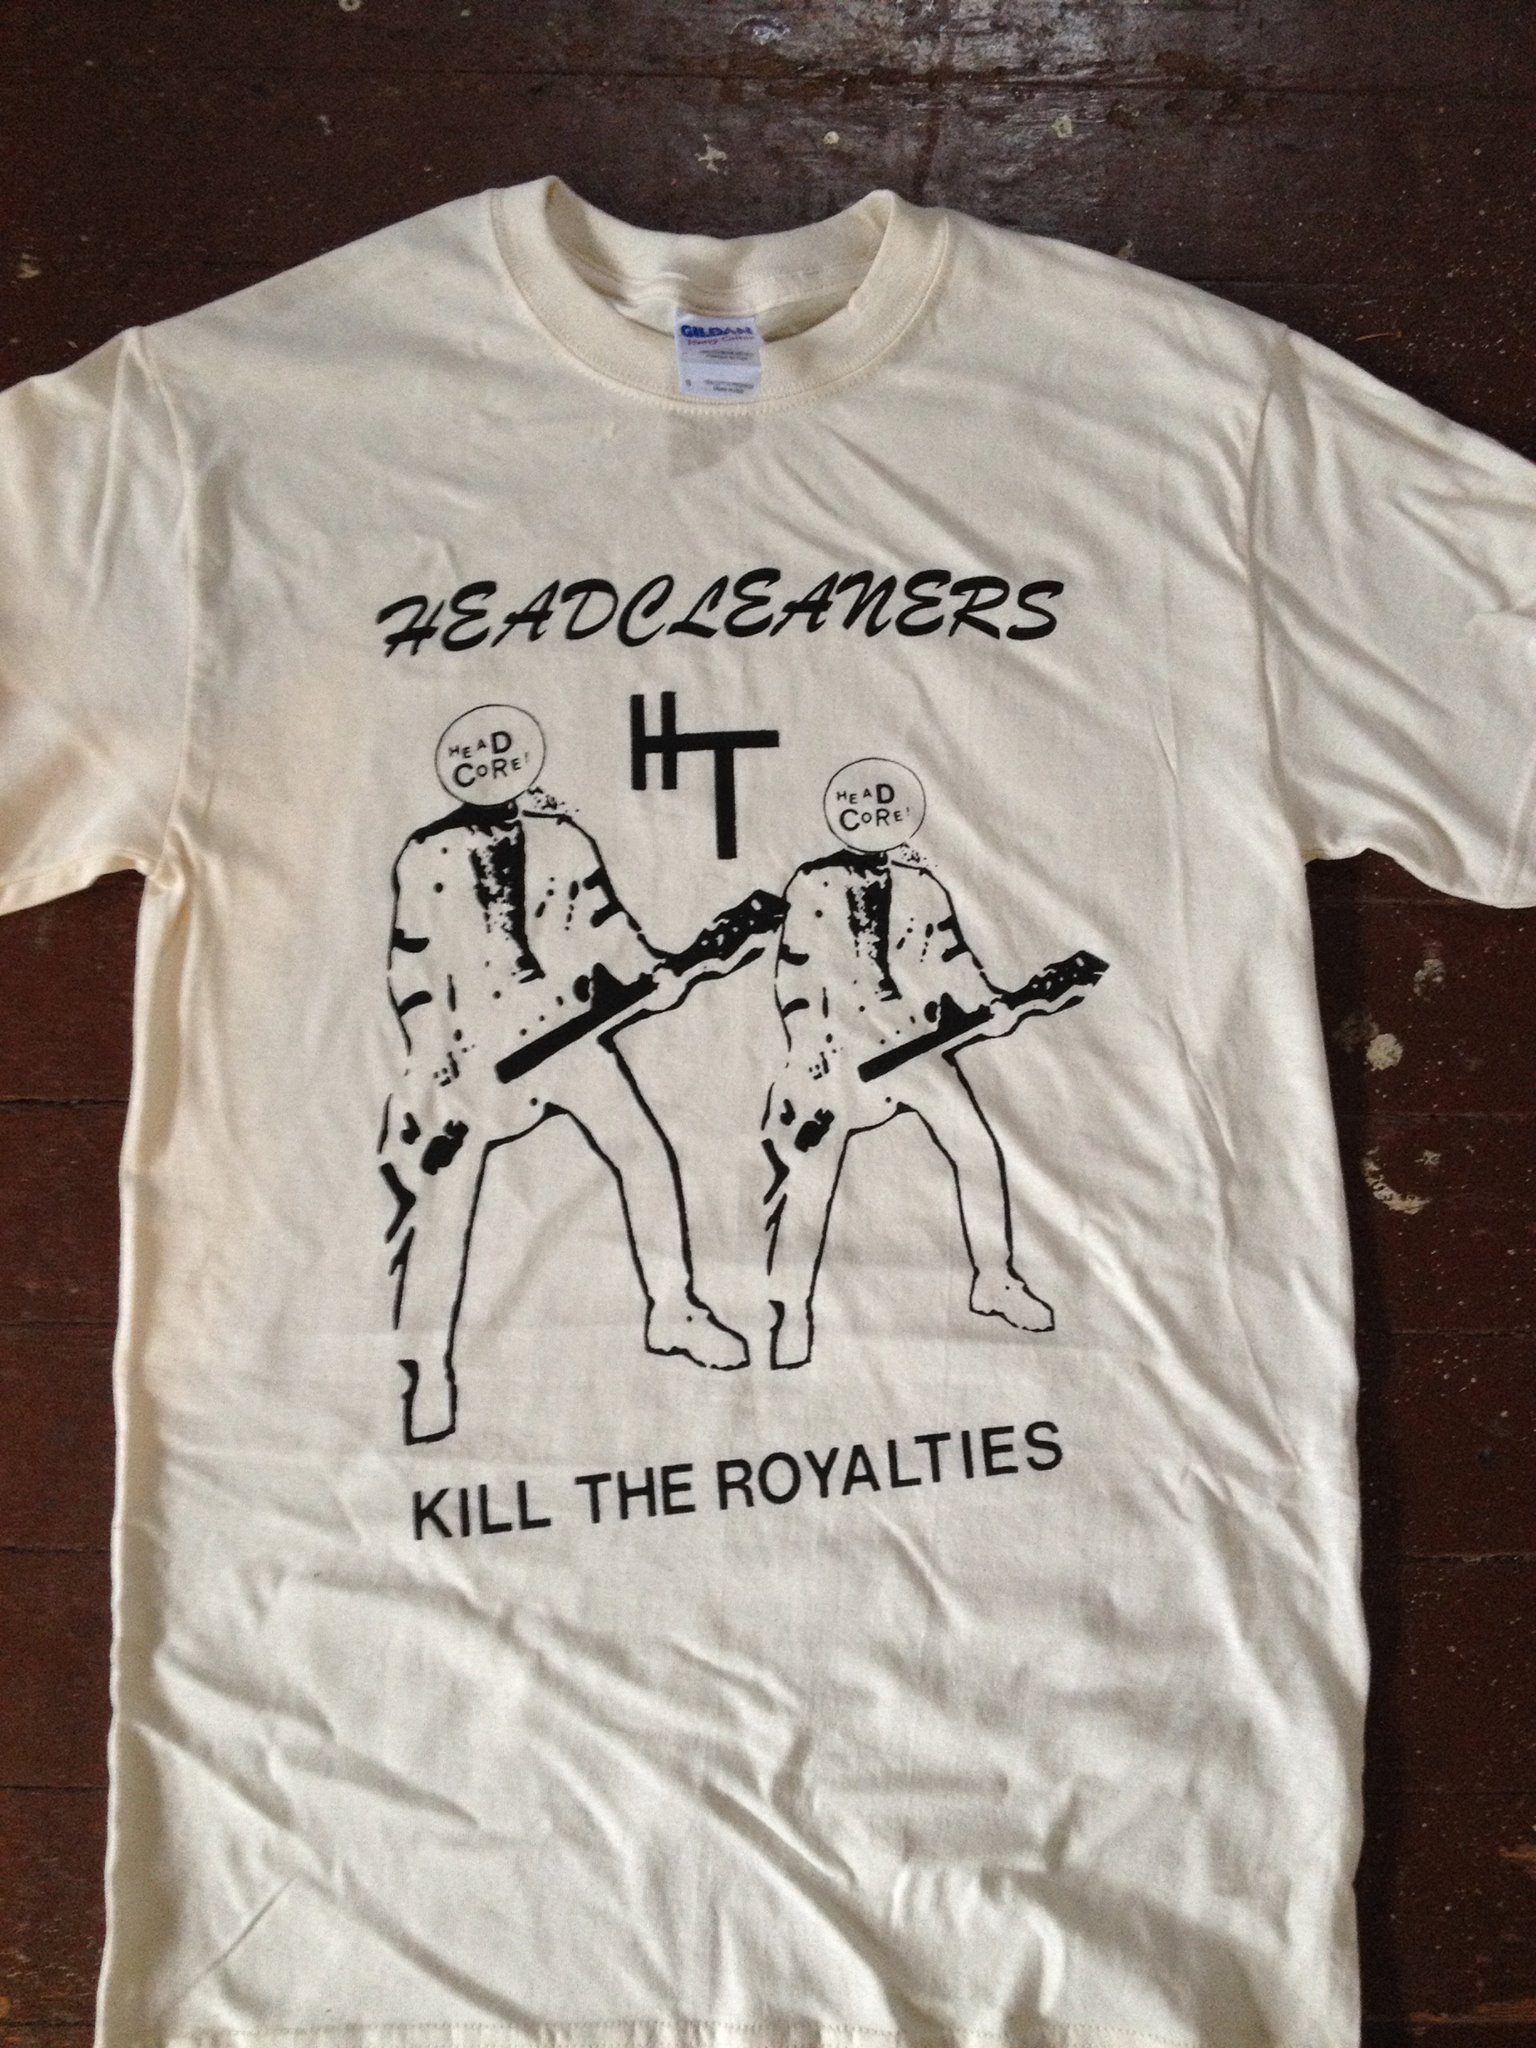  Headcleaners “Tribute” shirt designed &amp; printed in house 